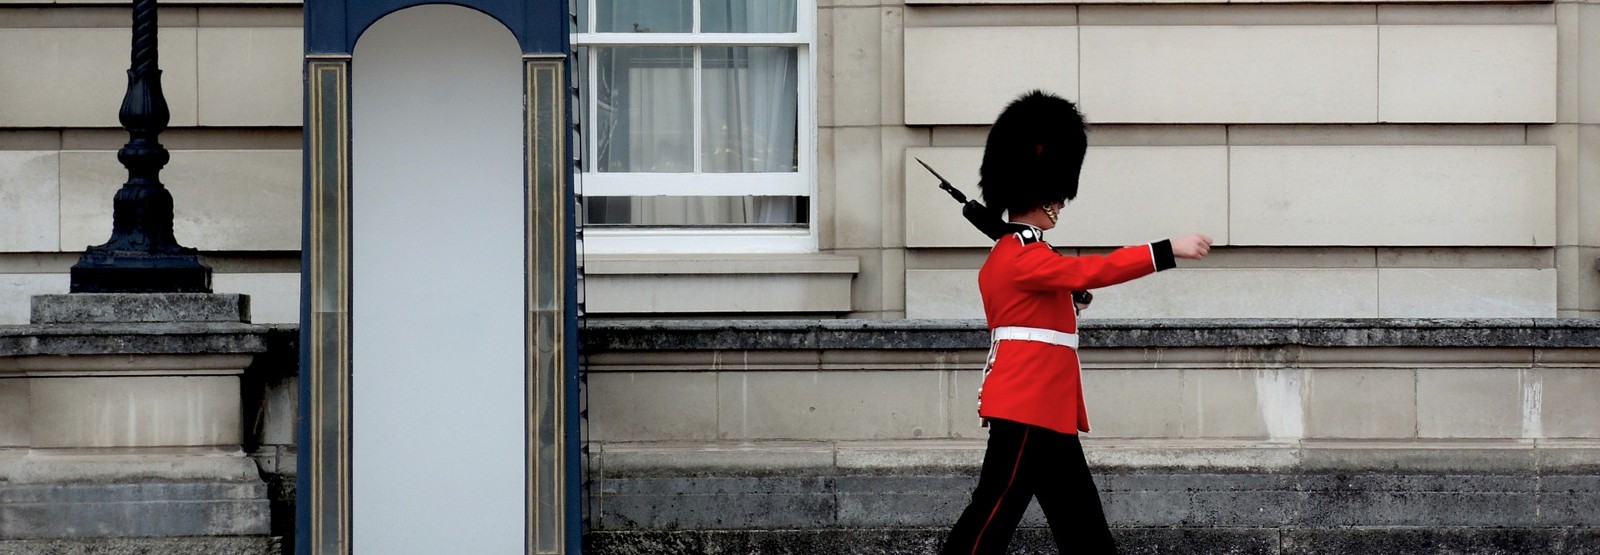 British guard in red jacket and tall black hat marching in front of a building.